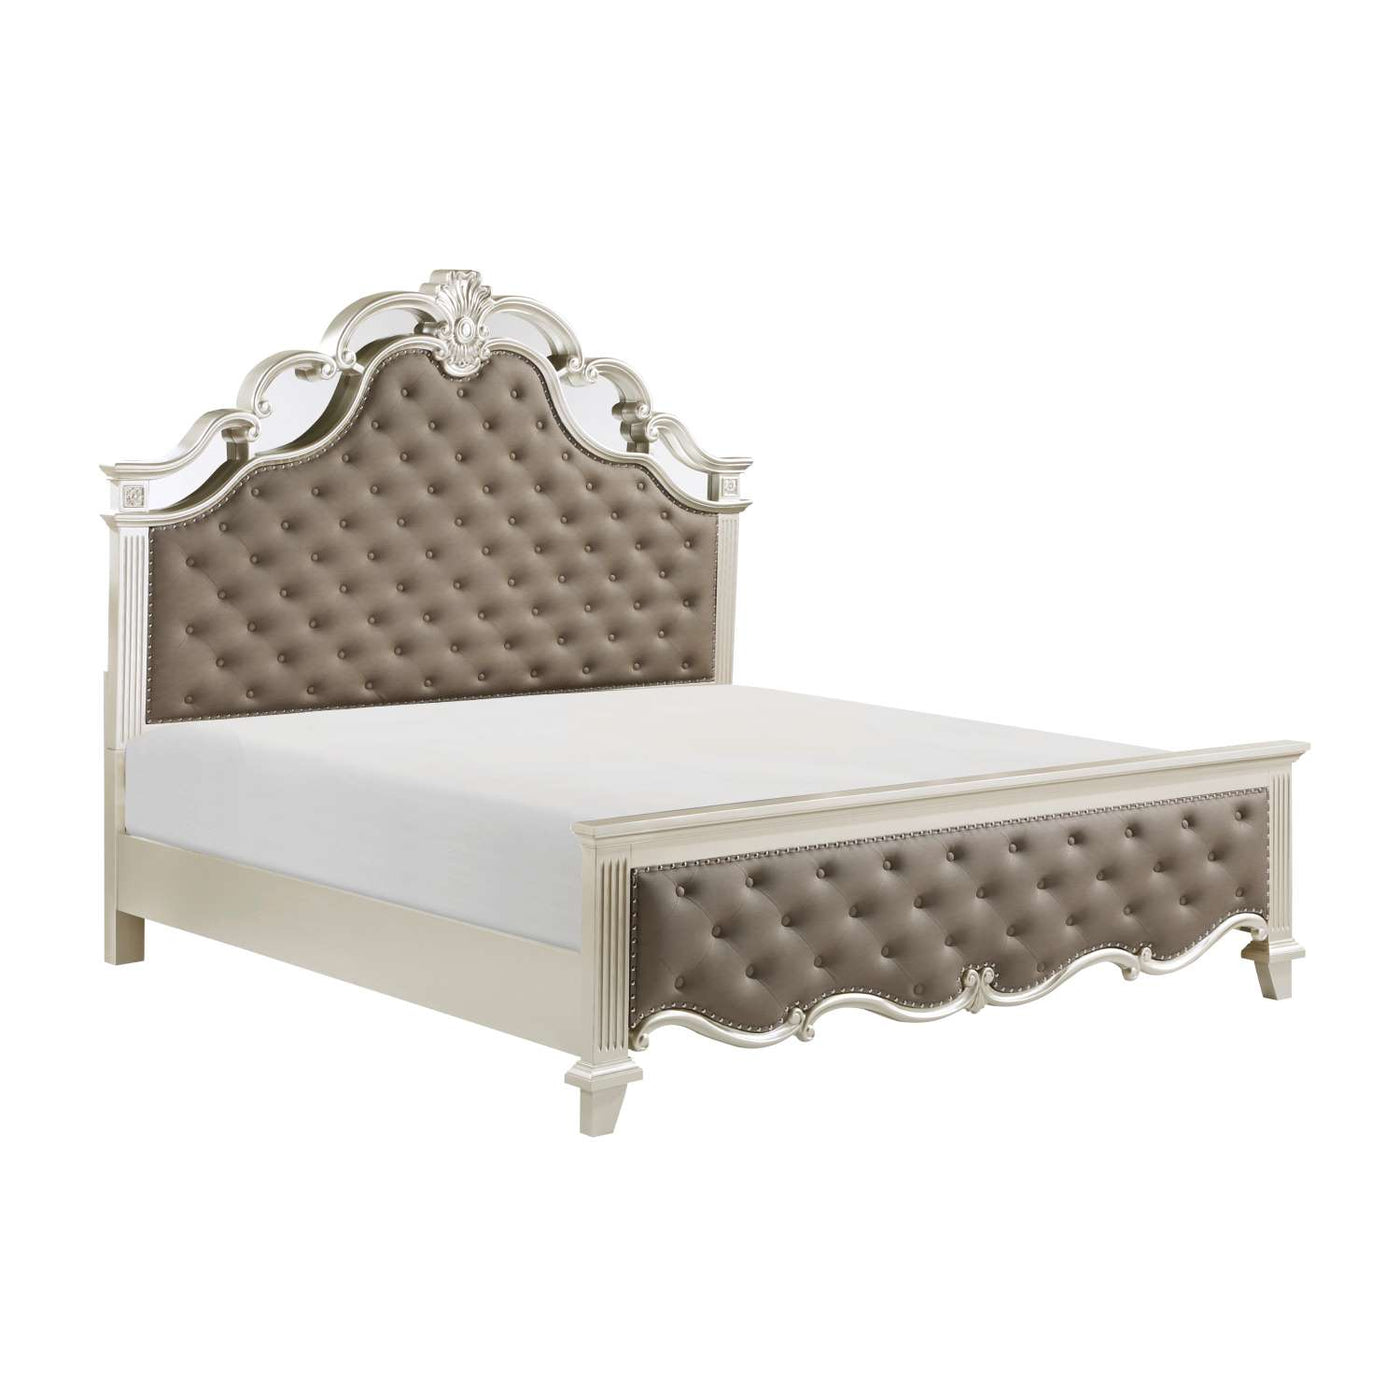 Ever 5-Piece Queen Bed Package - Champagne